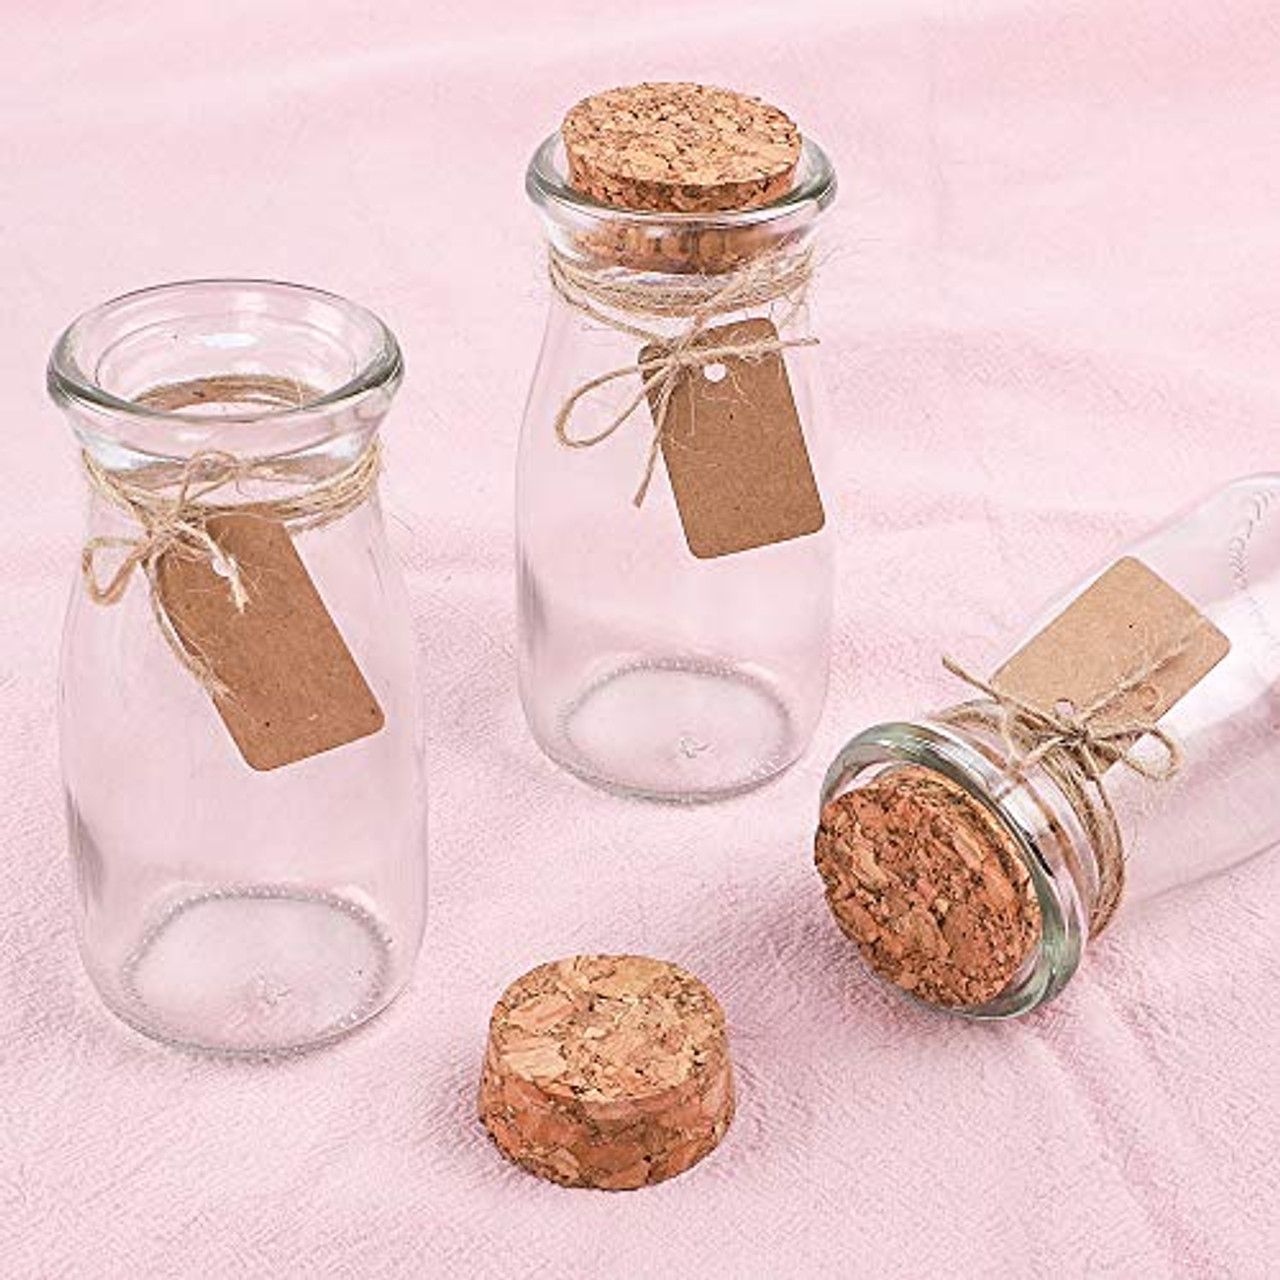 12pcs 4 x 2 Inches Small Glass Favor Jars, Milk Glass Bottles with Cork Lid.  3.4